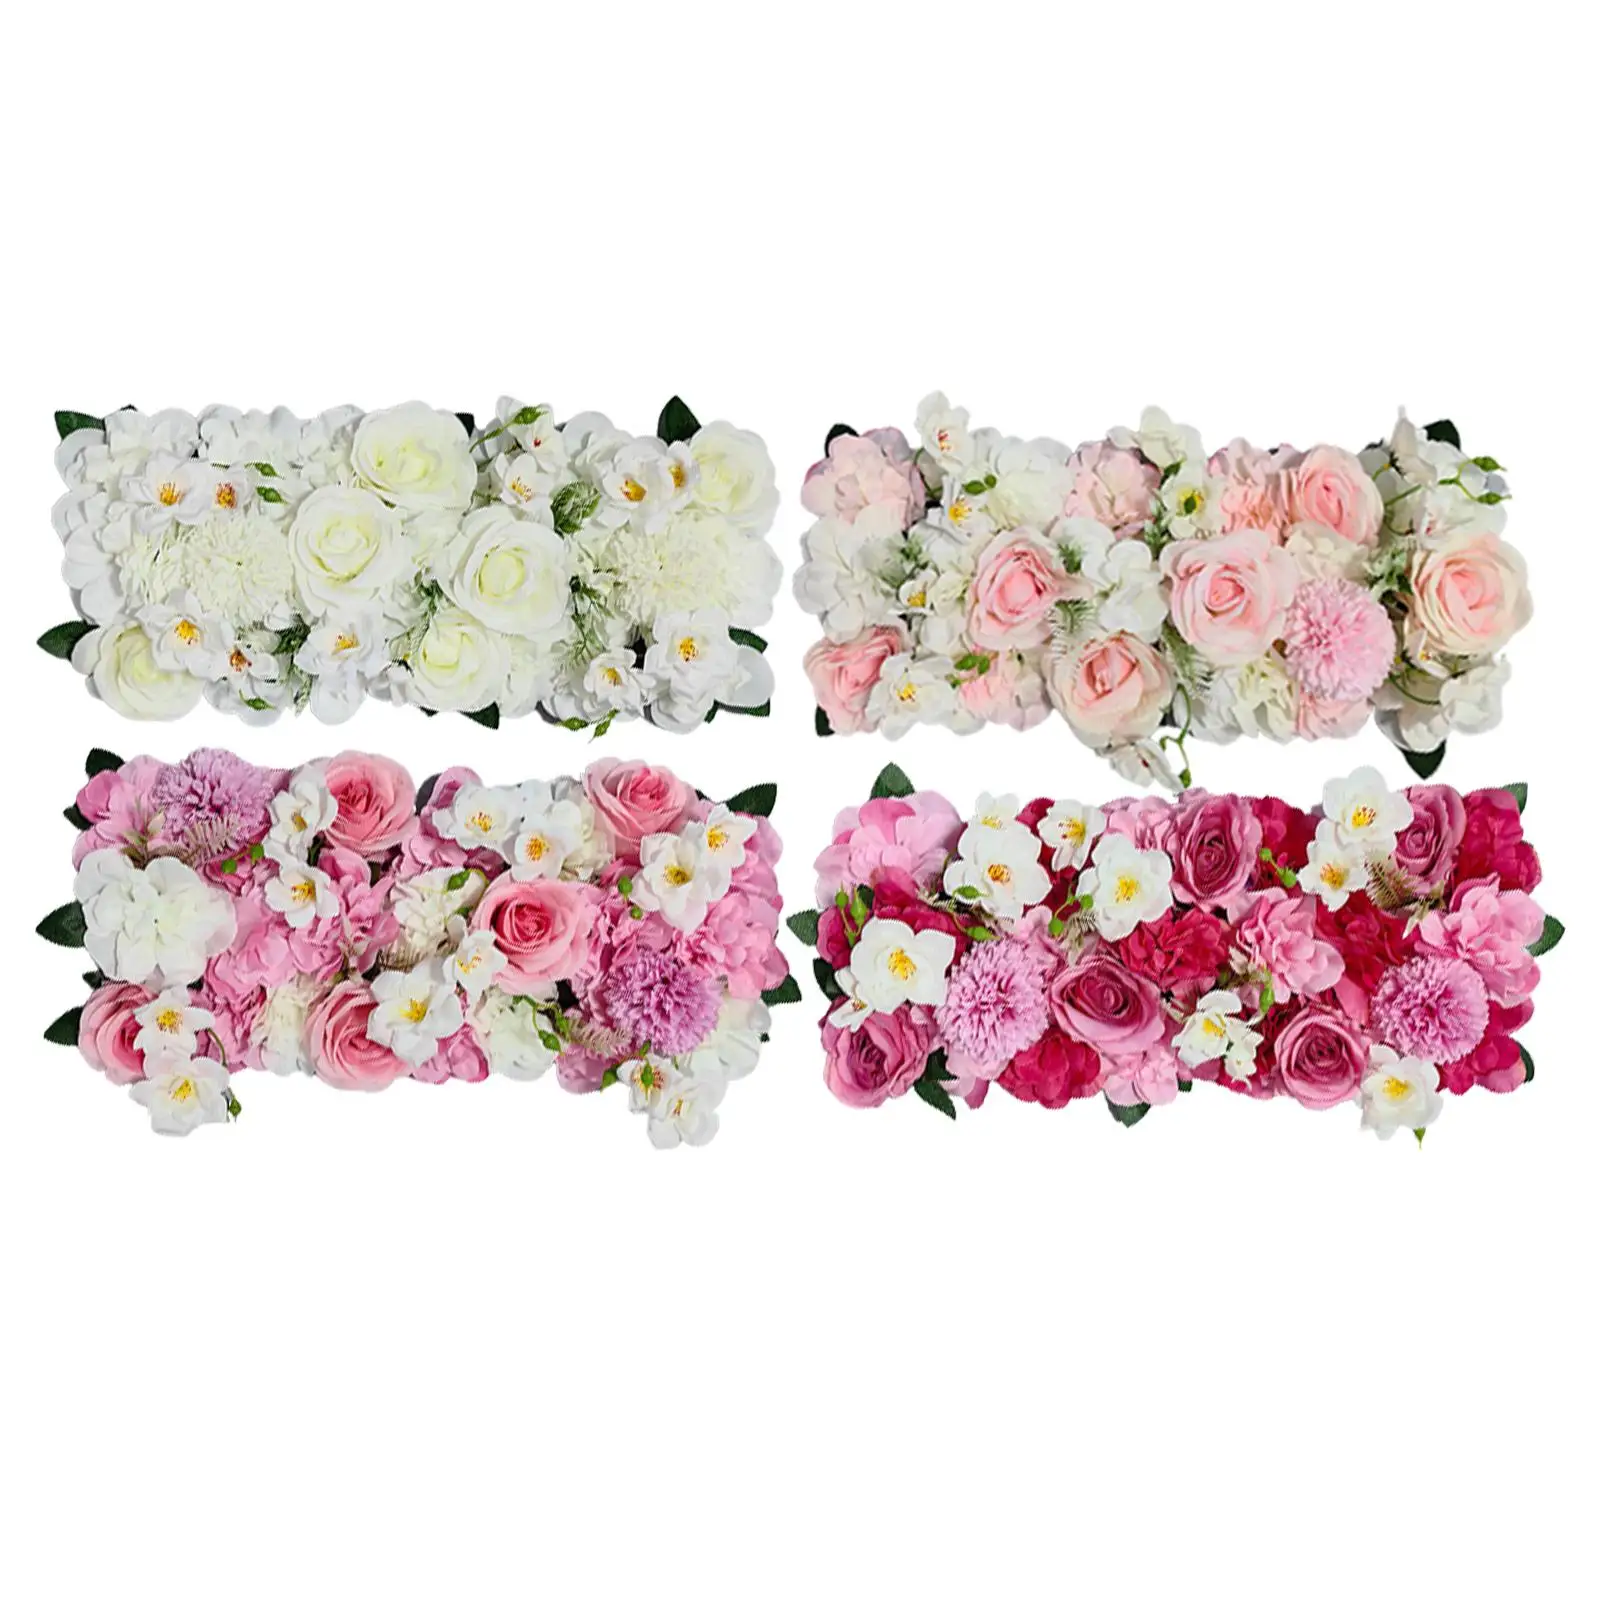 DIY Arch Flower Row Flowers Panel Floral Backdrop Decor Wedding Road Cited Flowers for Event Window Party Public Area Art Hall